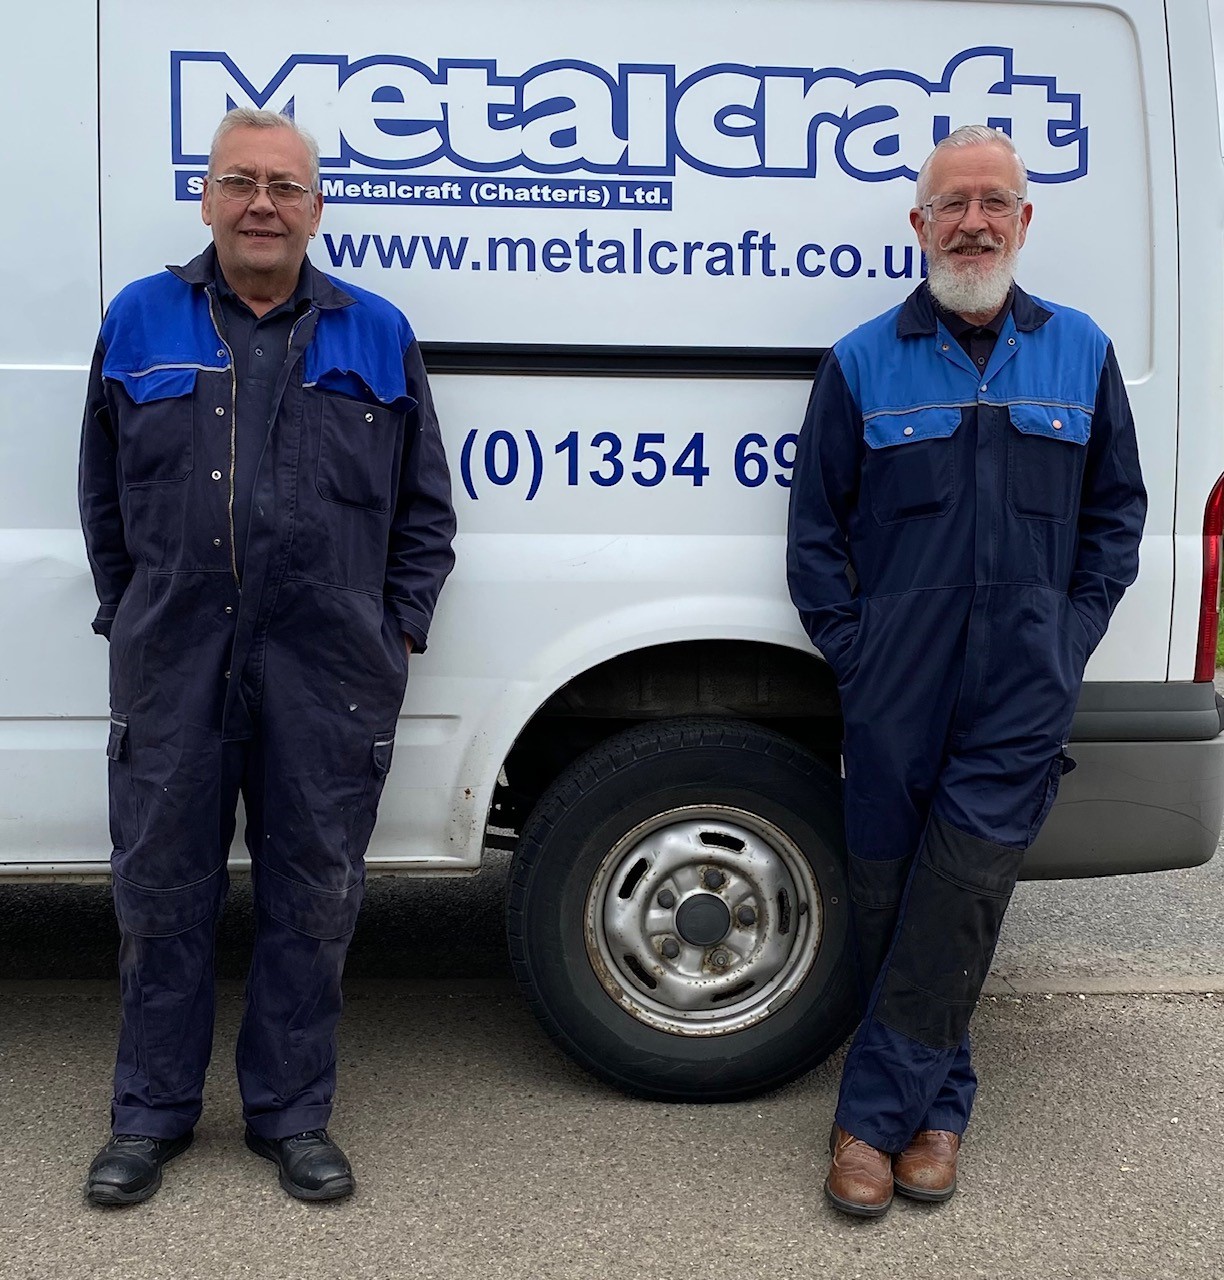 Longest-serving employee retires from Stainless Metalcraft after 53 years